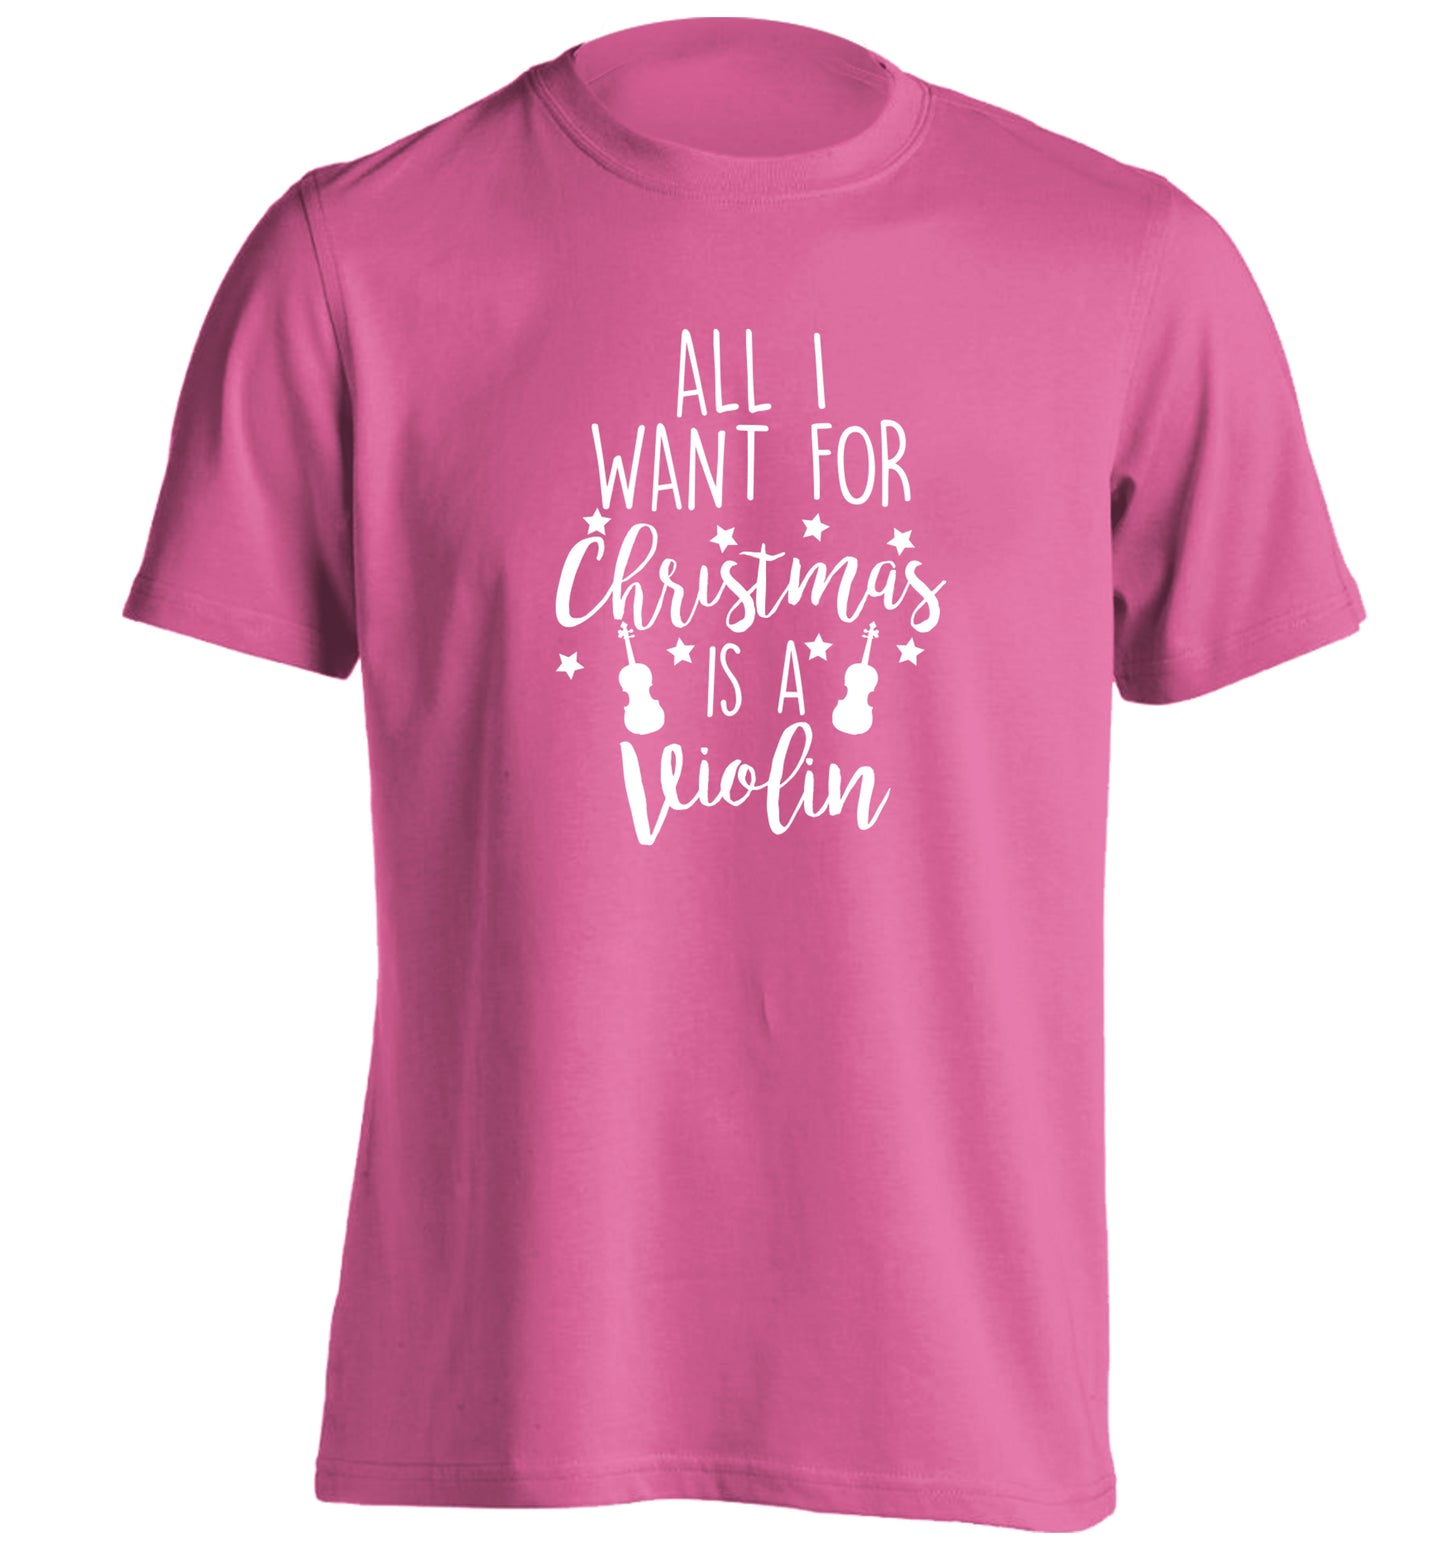 All I Want For Christmas is a Violin adults unisex pink Tshirt 2XL